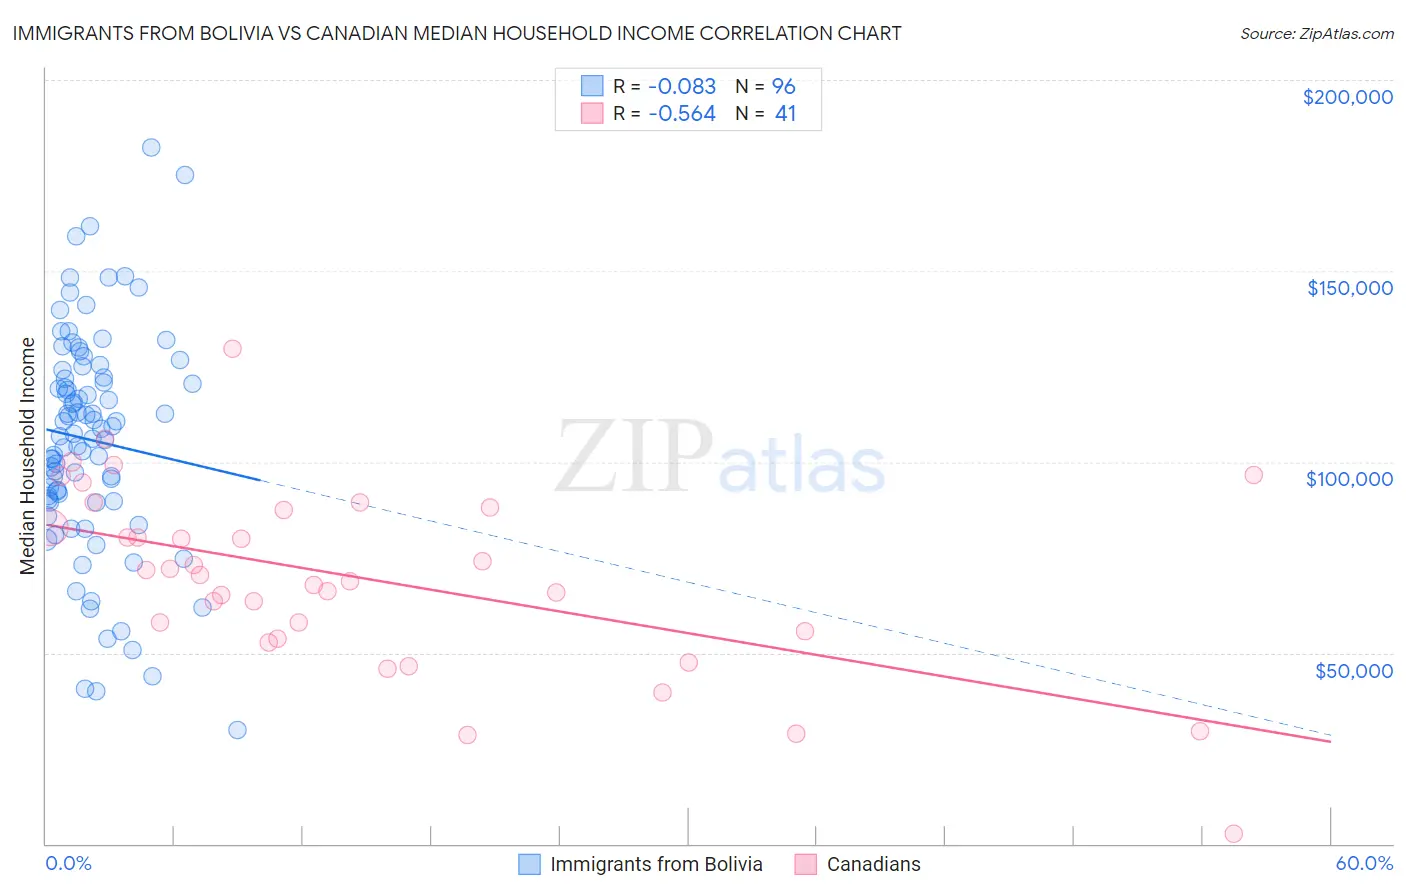 Immigrants from Bolivia vs Canadian Median Household Income